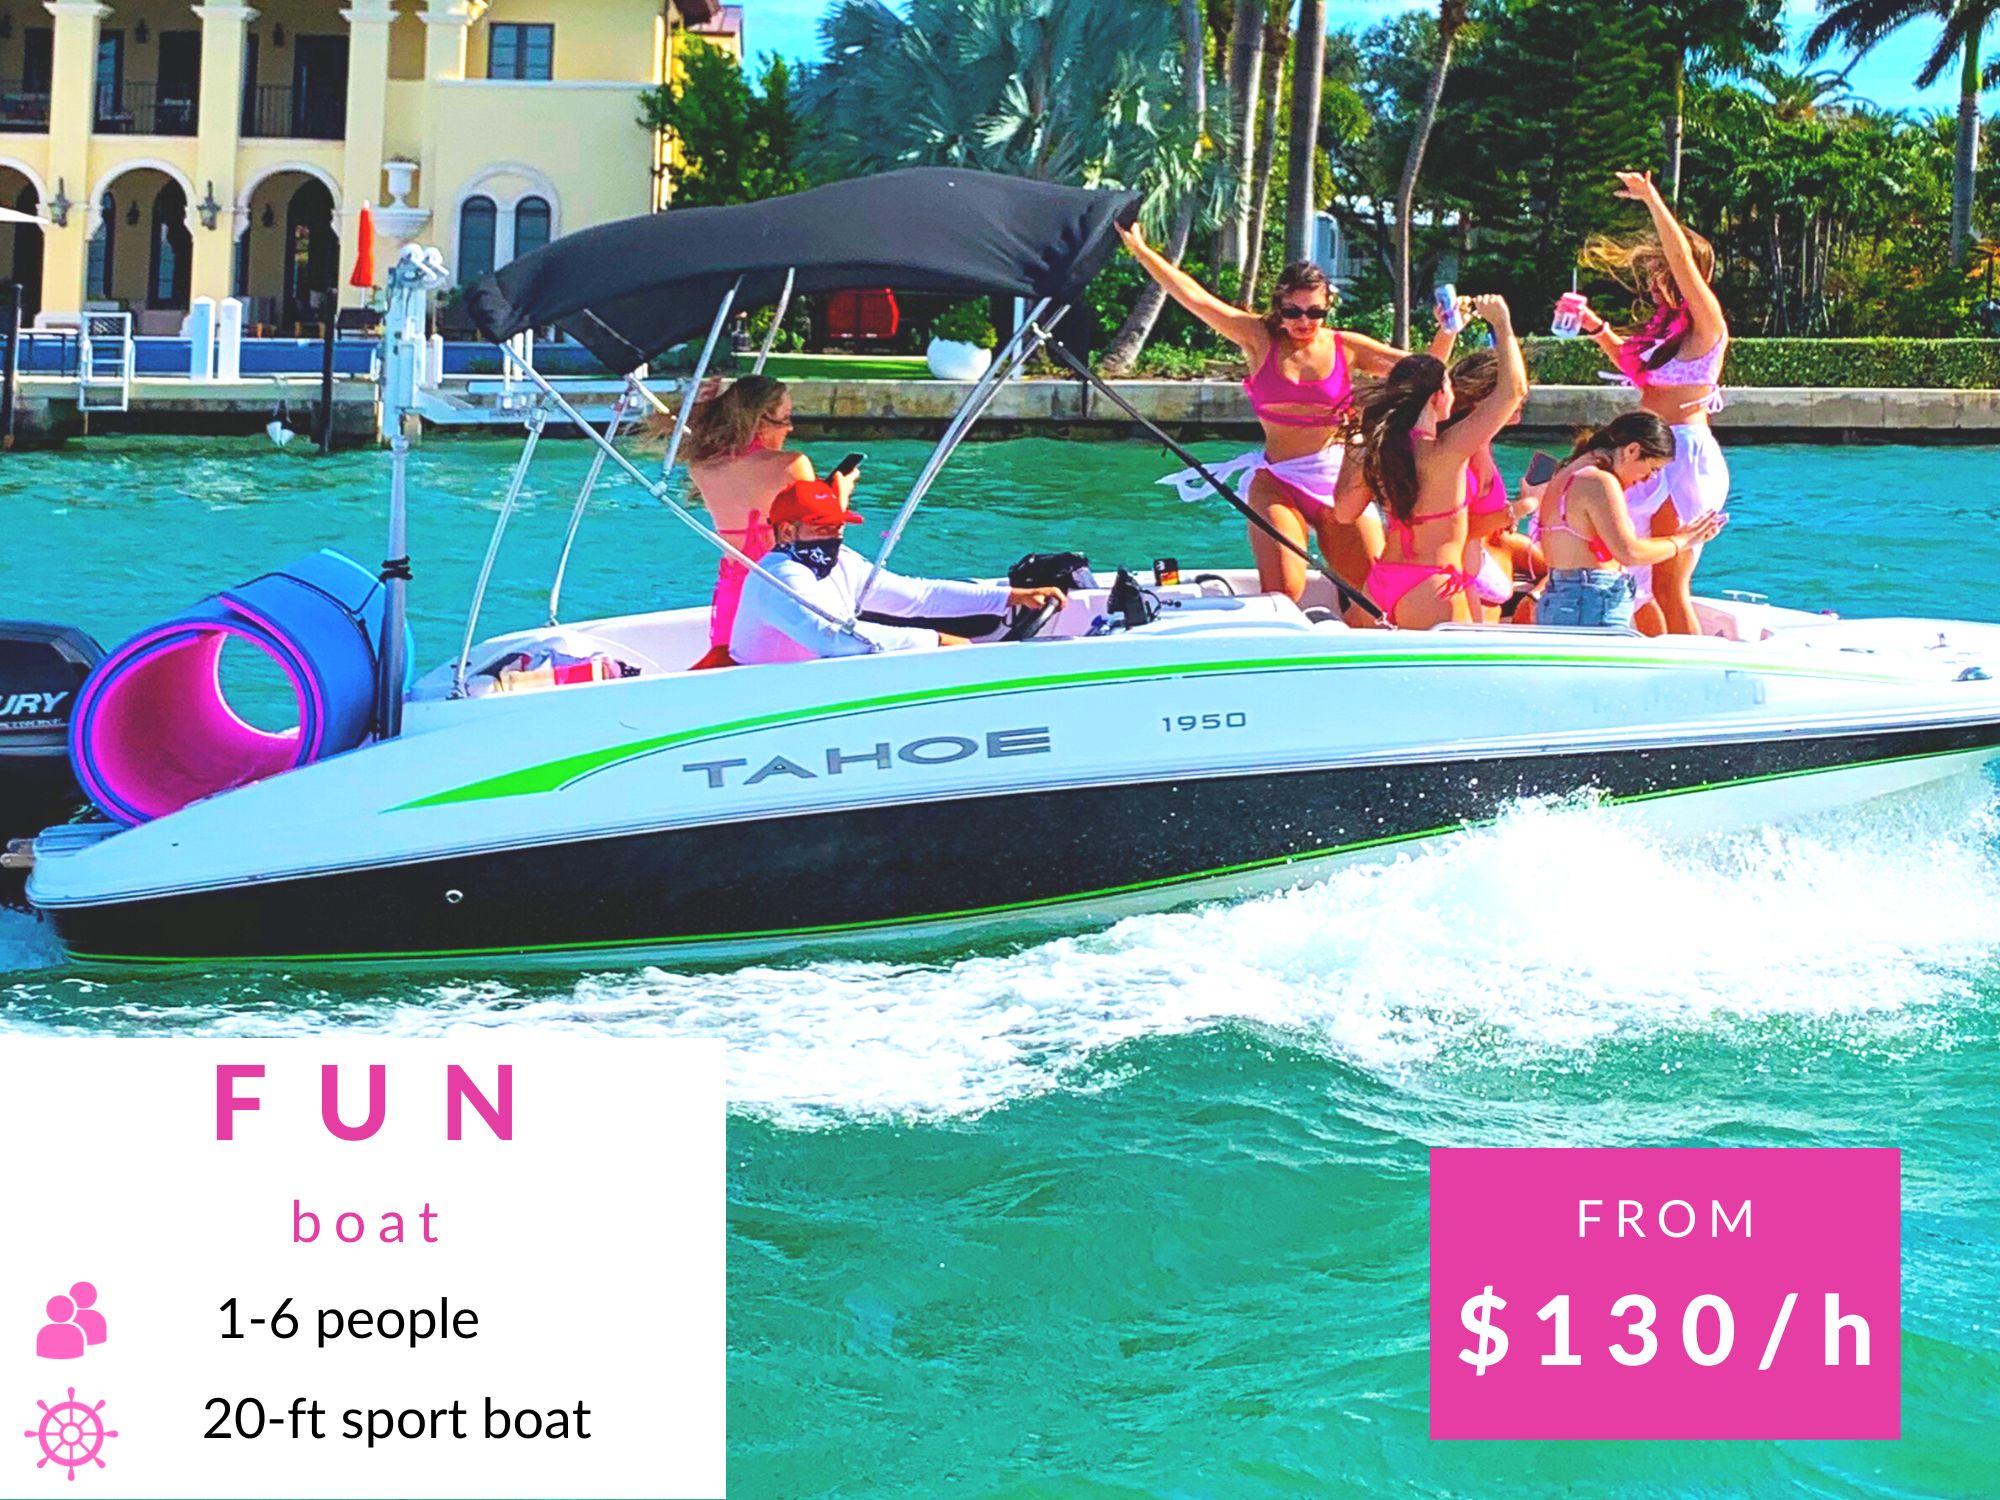 Half Day, Or Per Hour Boat Rental In Miami Beach. Cheap Prices And Last Minute Discount.